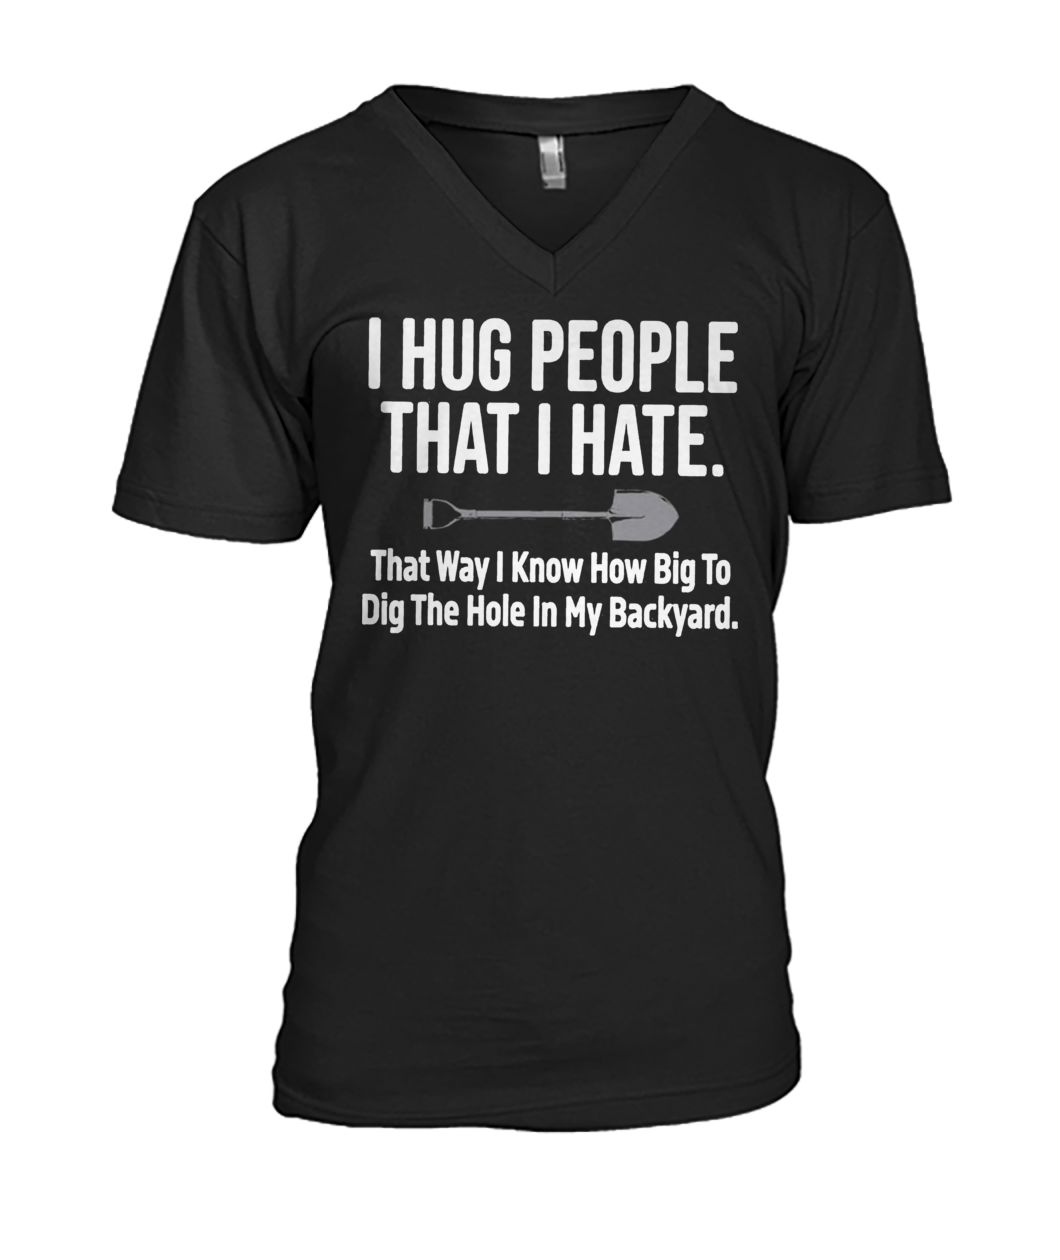 I hug people that I hate that way I know how big to dig the hole in my backyard mens v-neck